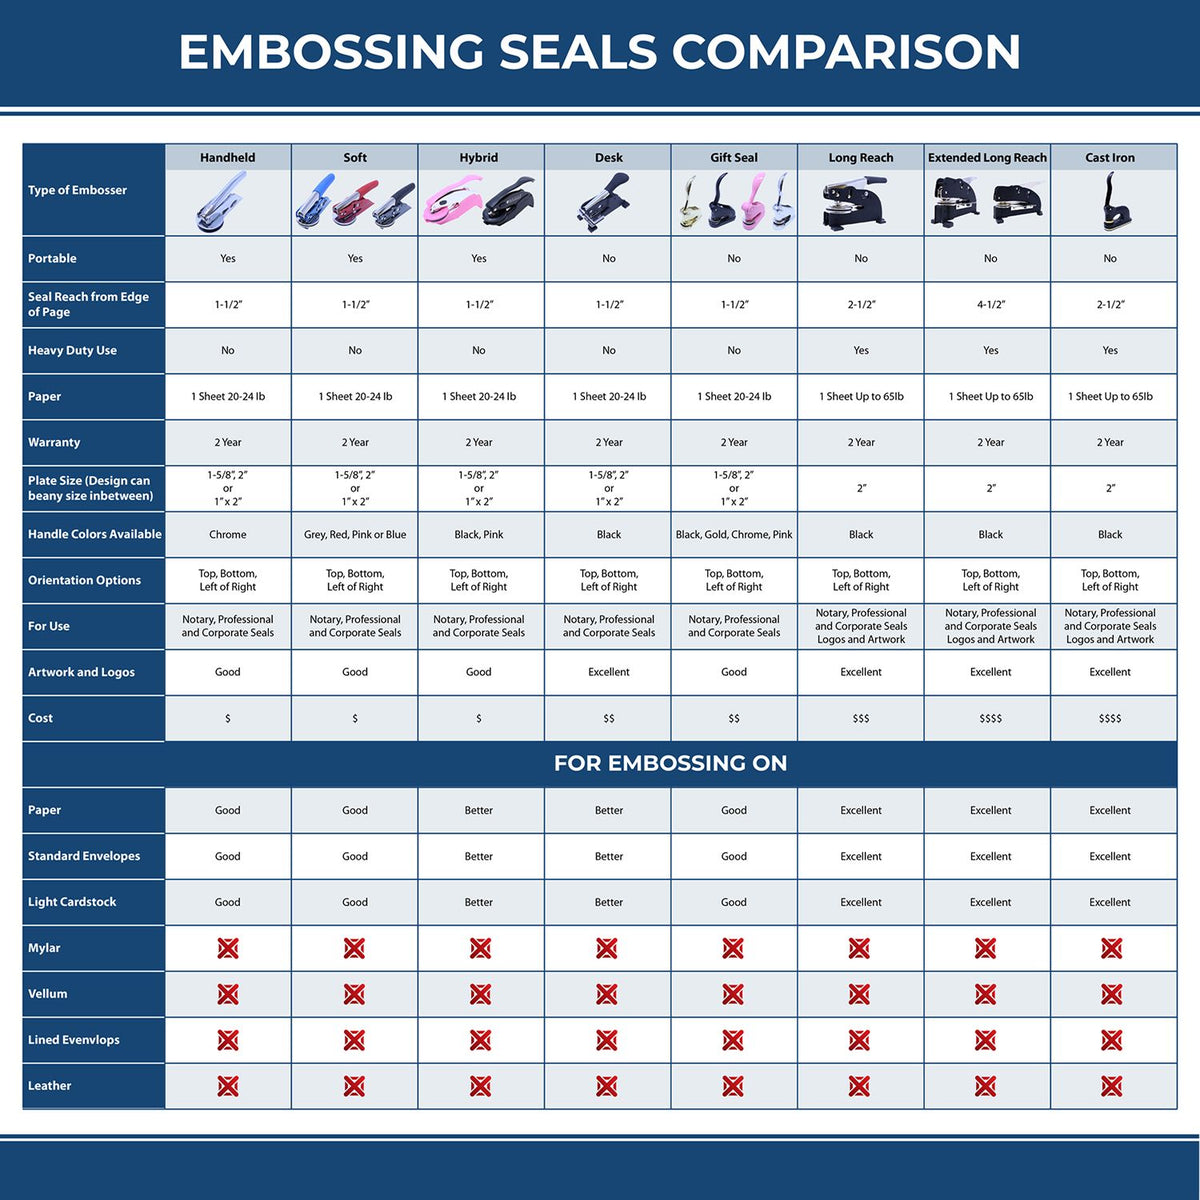 A comparison chart for the different types of mount models available for the Arizona Desk Architect Embossing Seal.